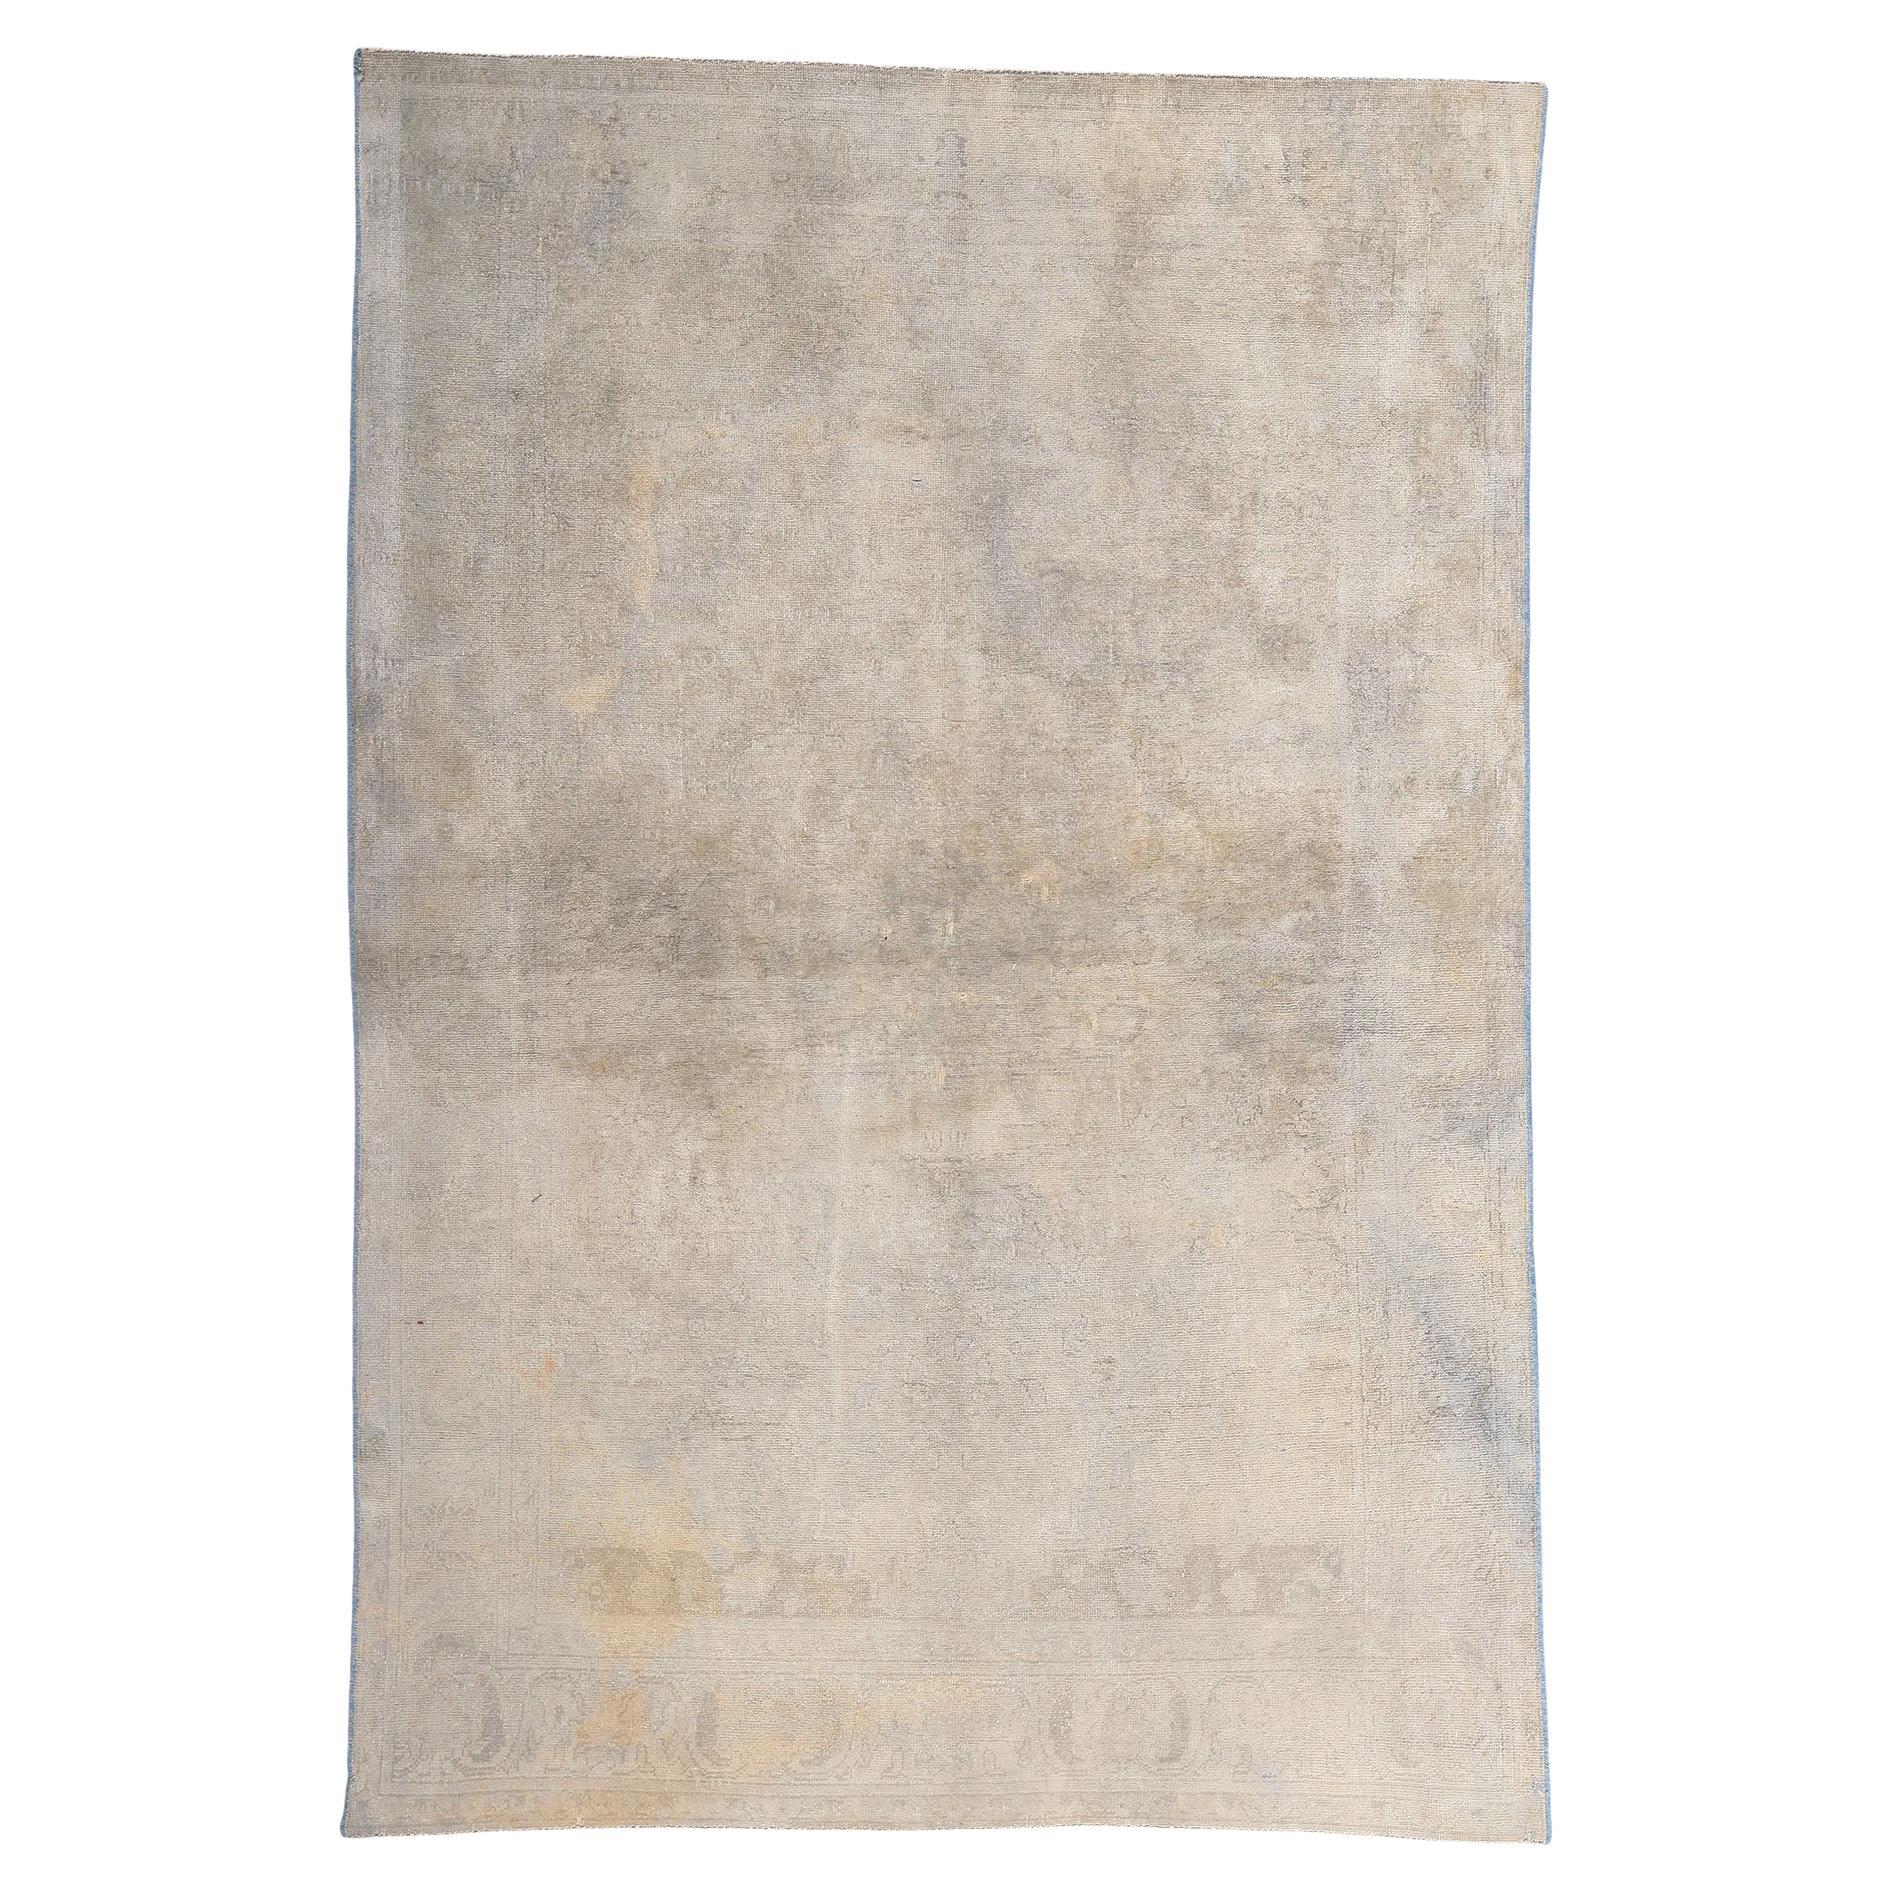 Muted Vintage Turkish Oushak Rug, Industrial Chic Meets Laid-Back Luxury